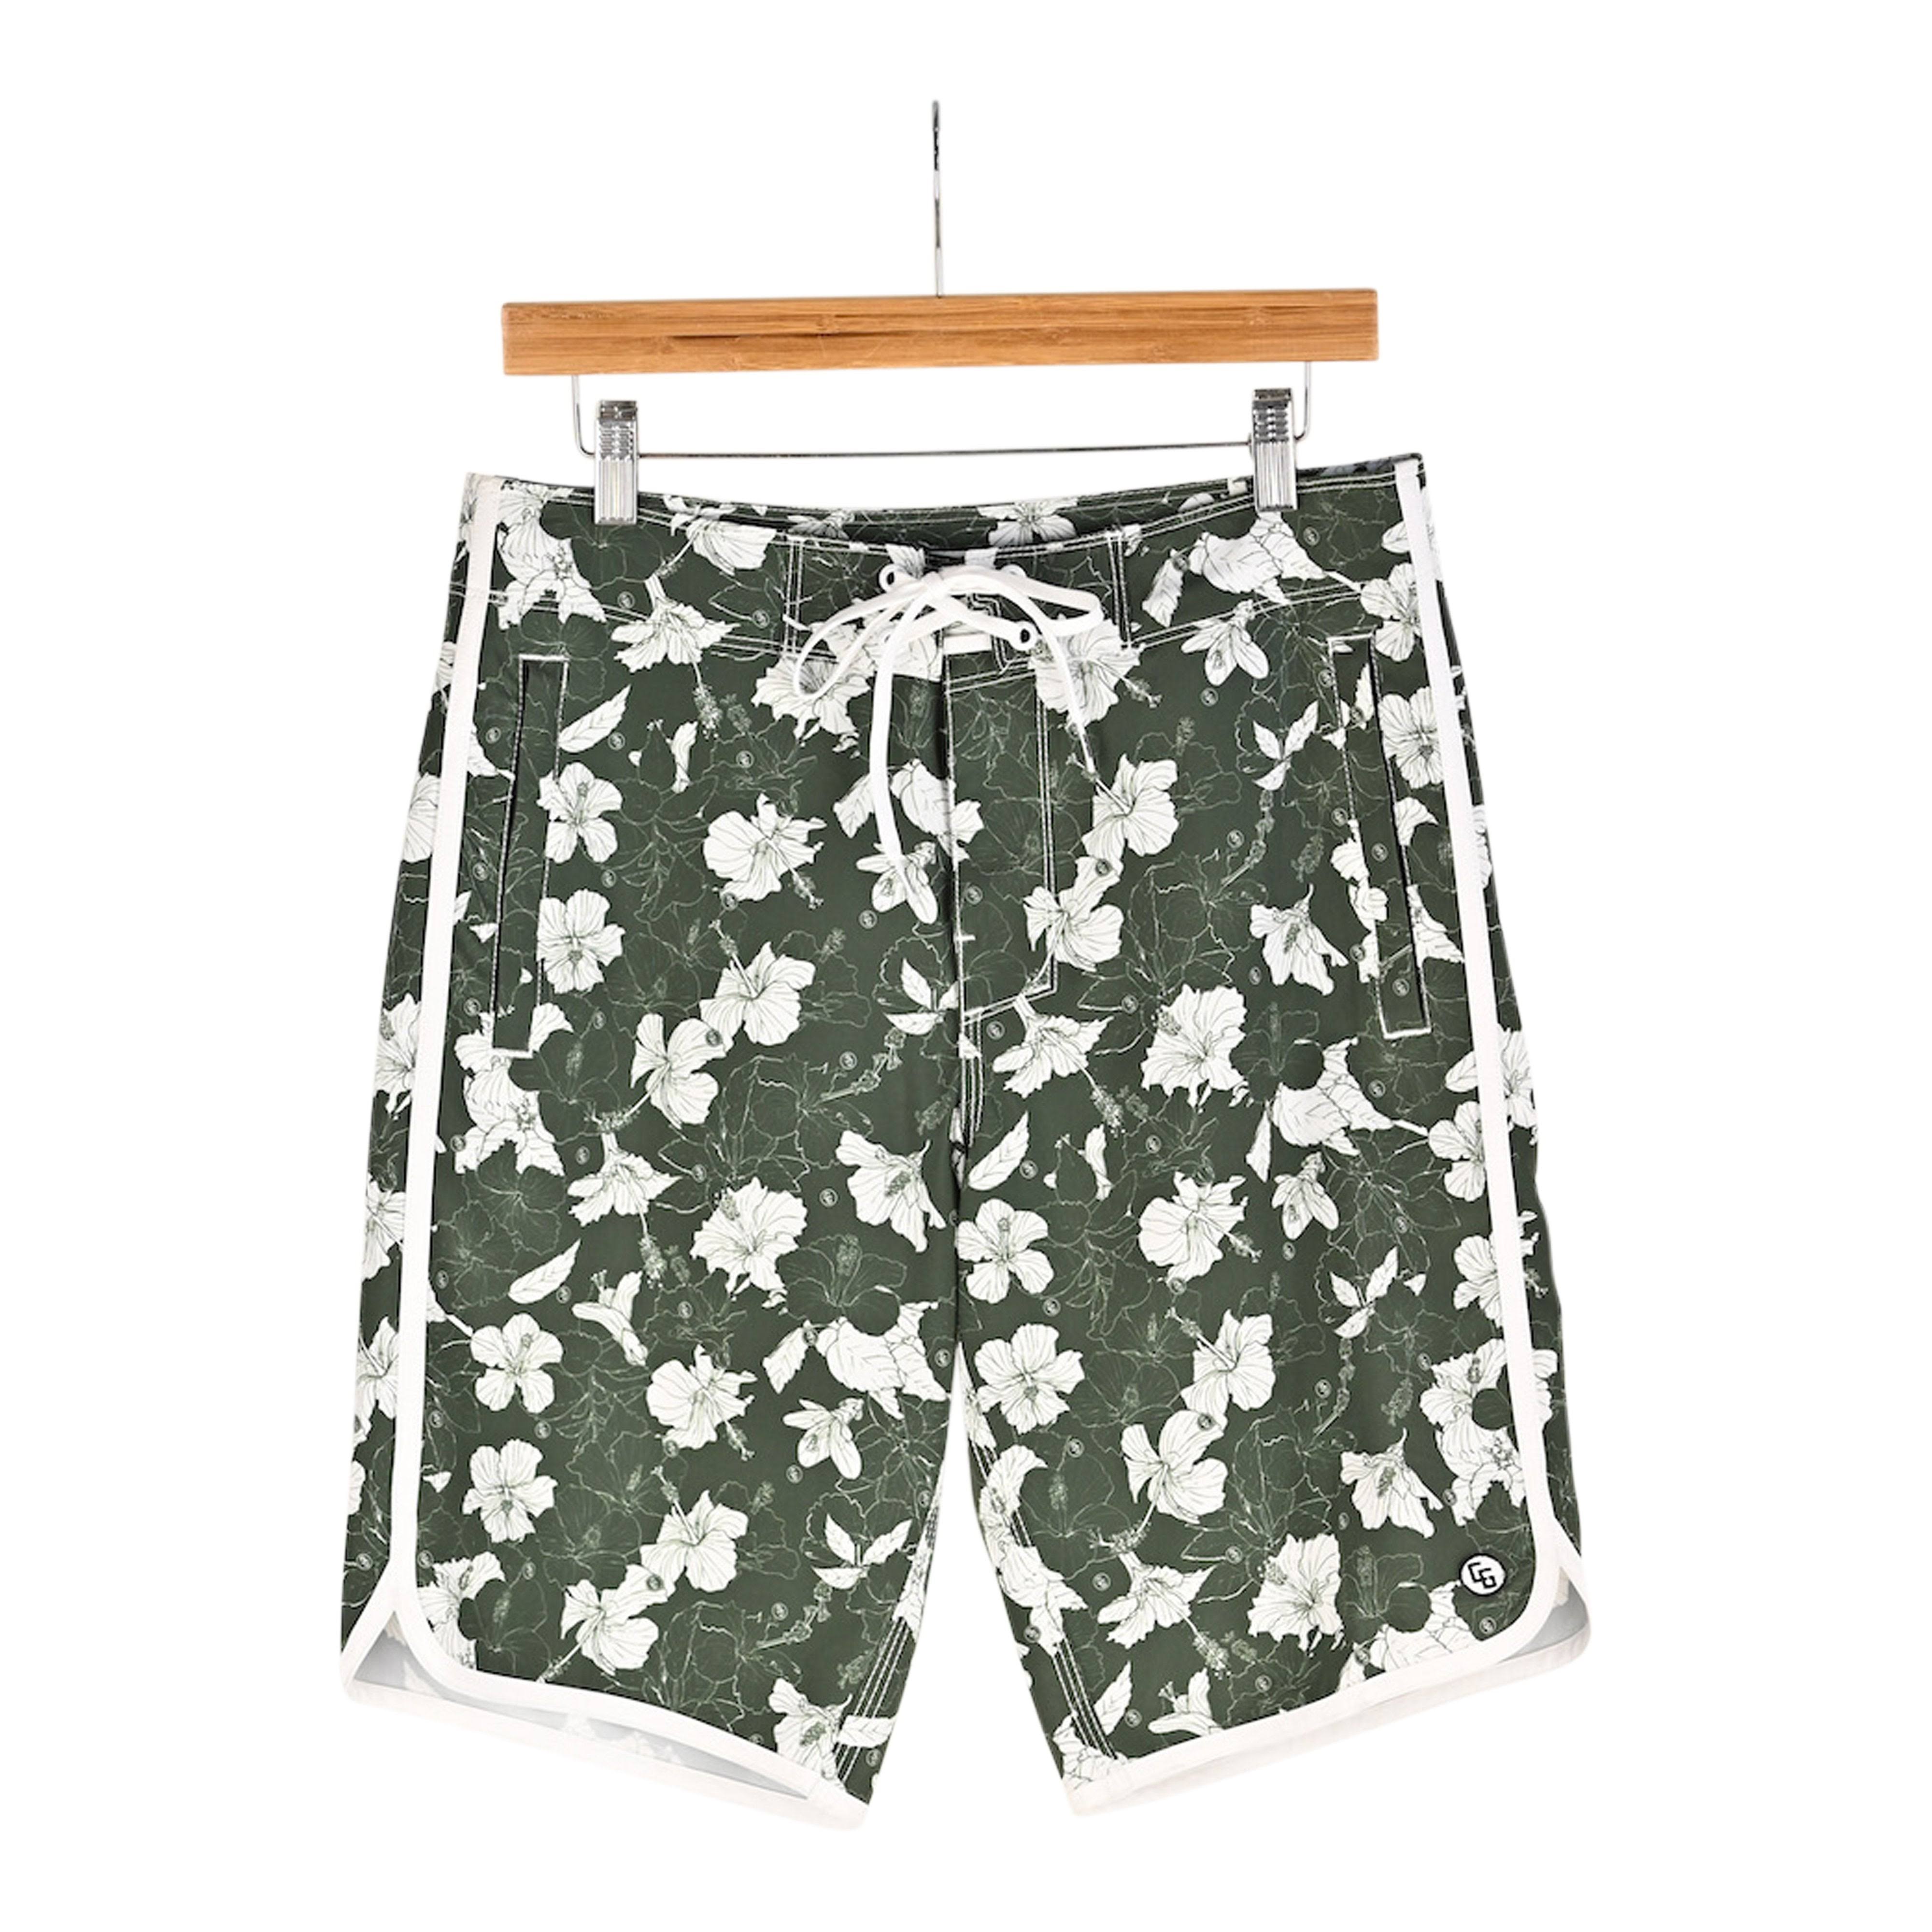 309 Fit / OG Athletic Fit / Board Shorts Aloha Military Green / 34